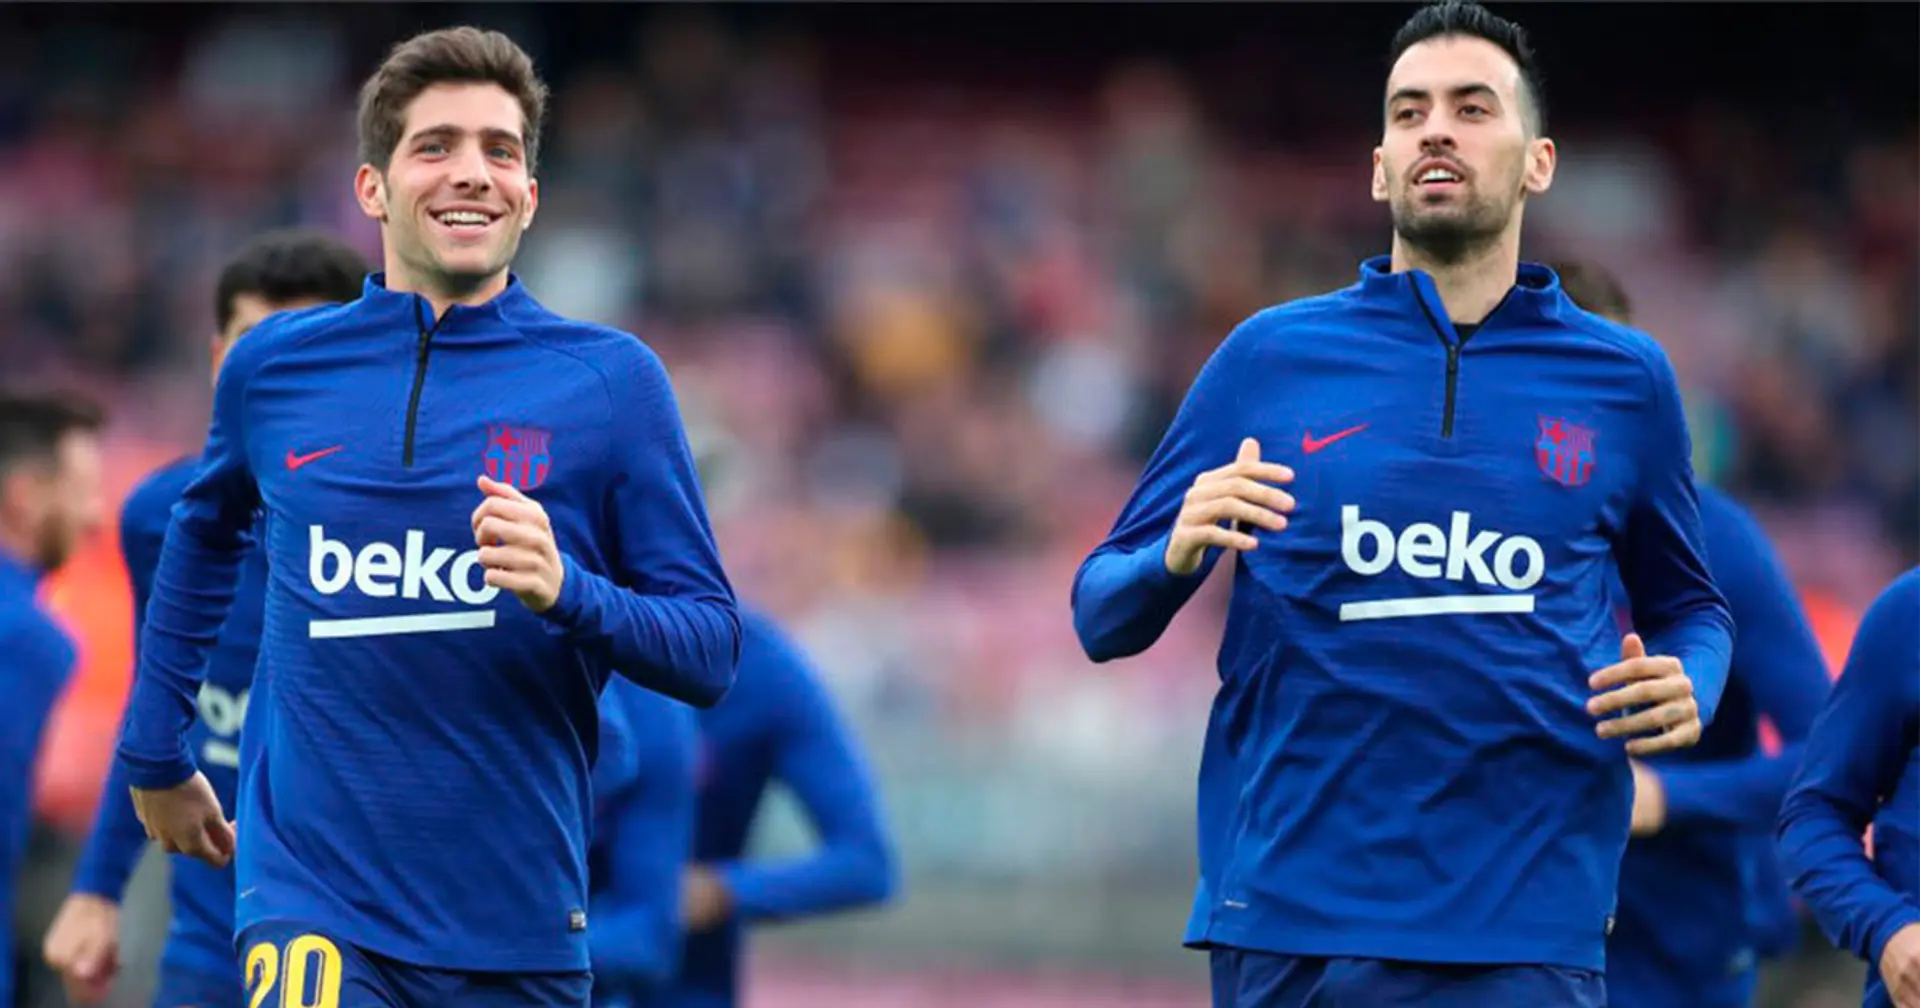 Are you alright with Barca's plan to keep both Busquets and Sergi Roberto?